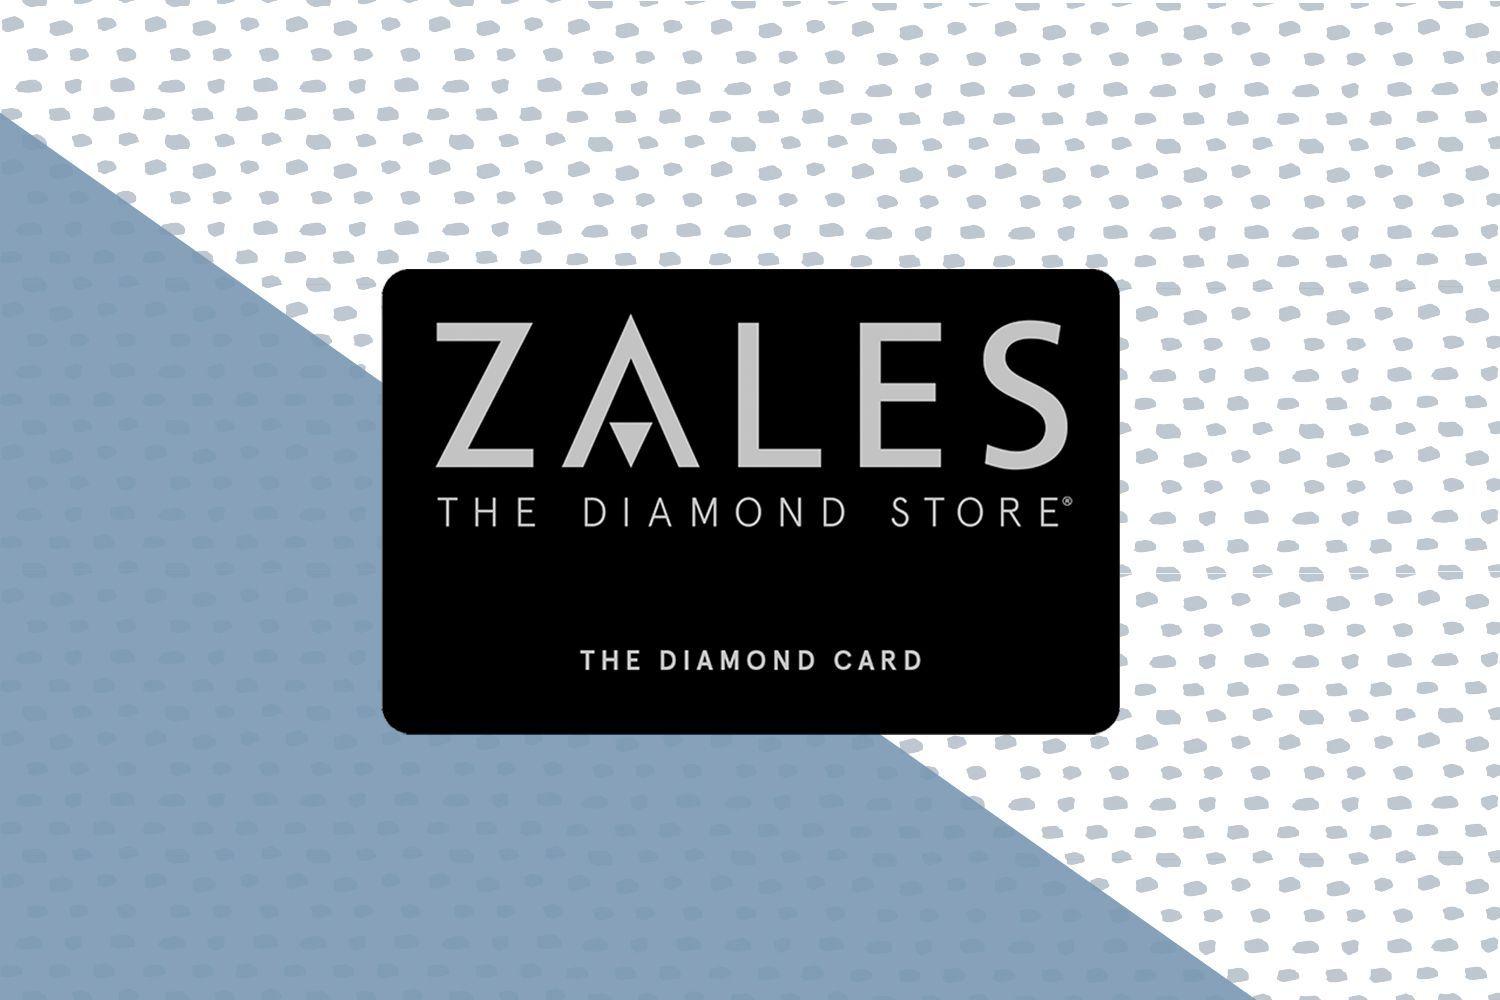 Zales.com Logo - Zales Credit Card Review: The Best Way to Save?